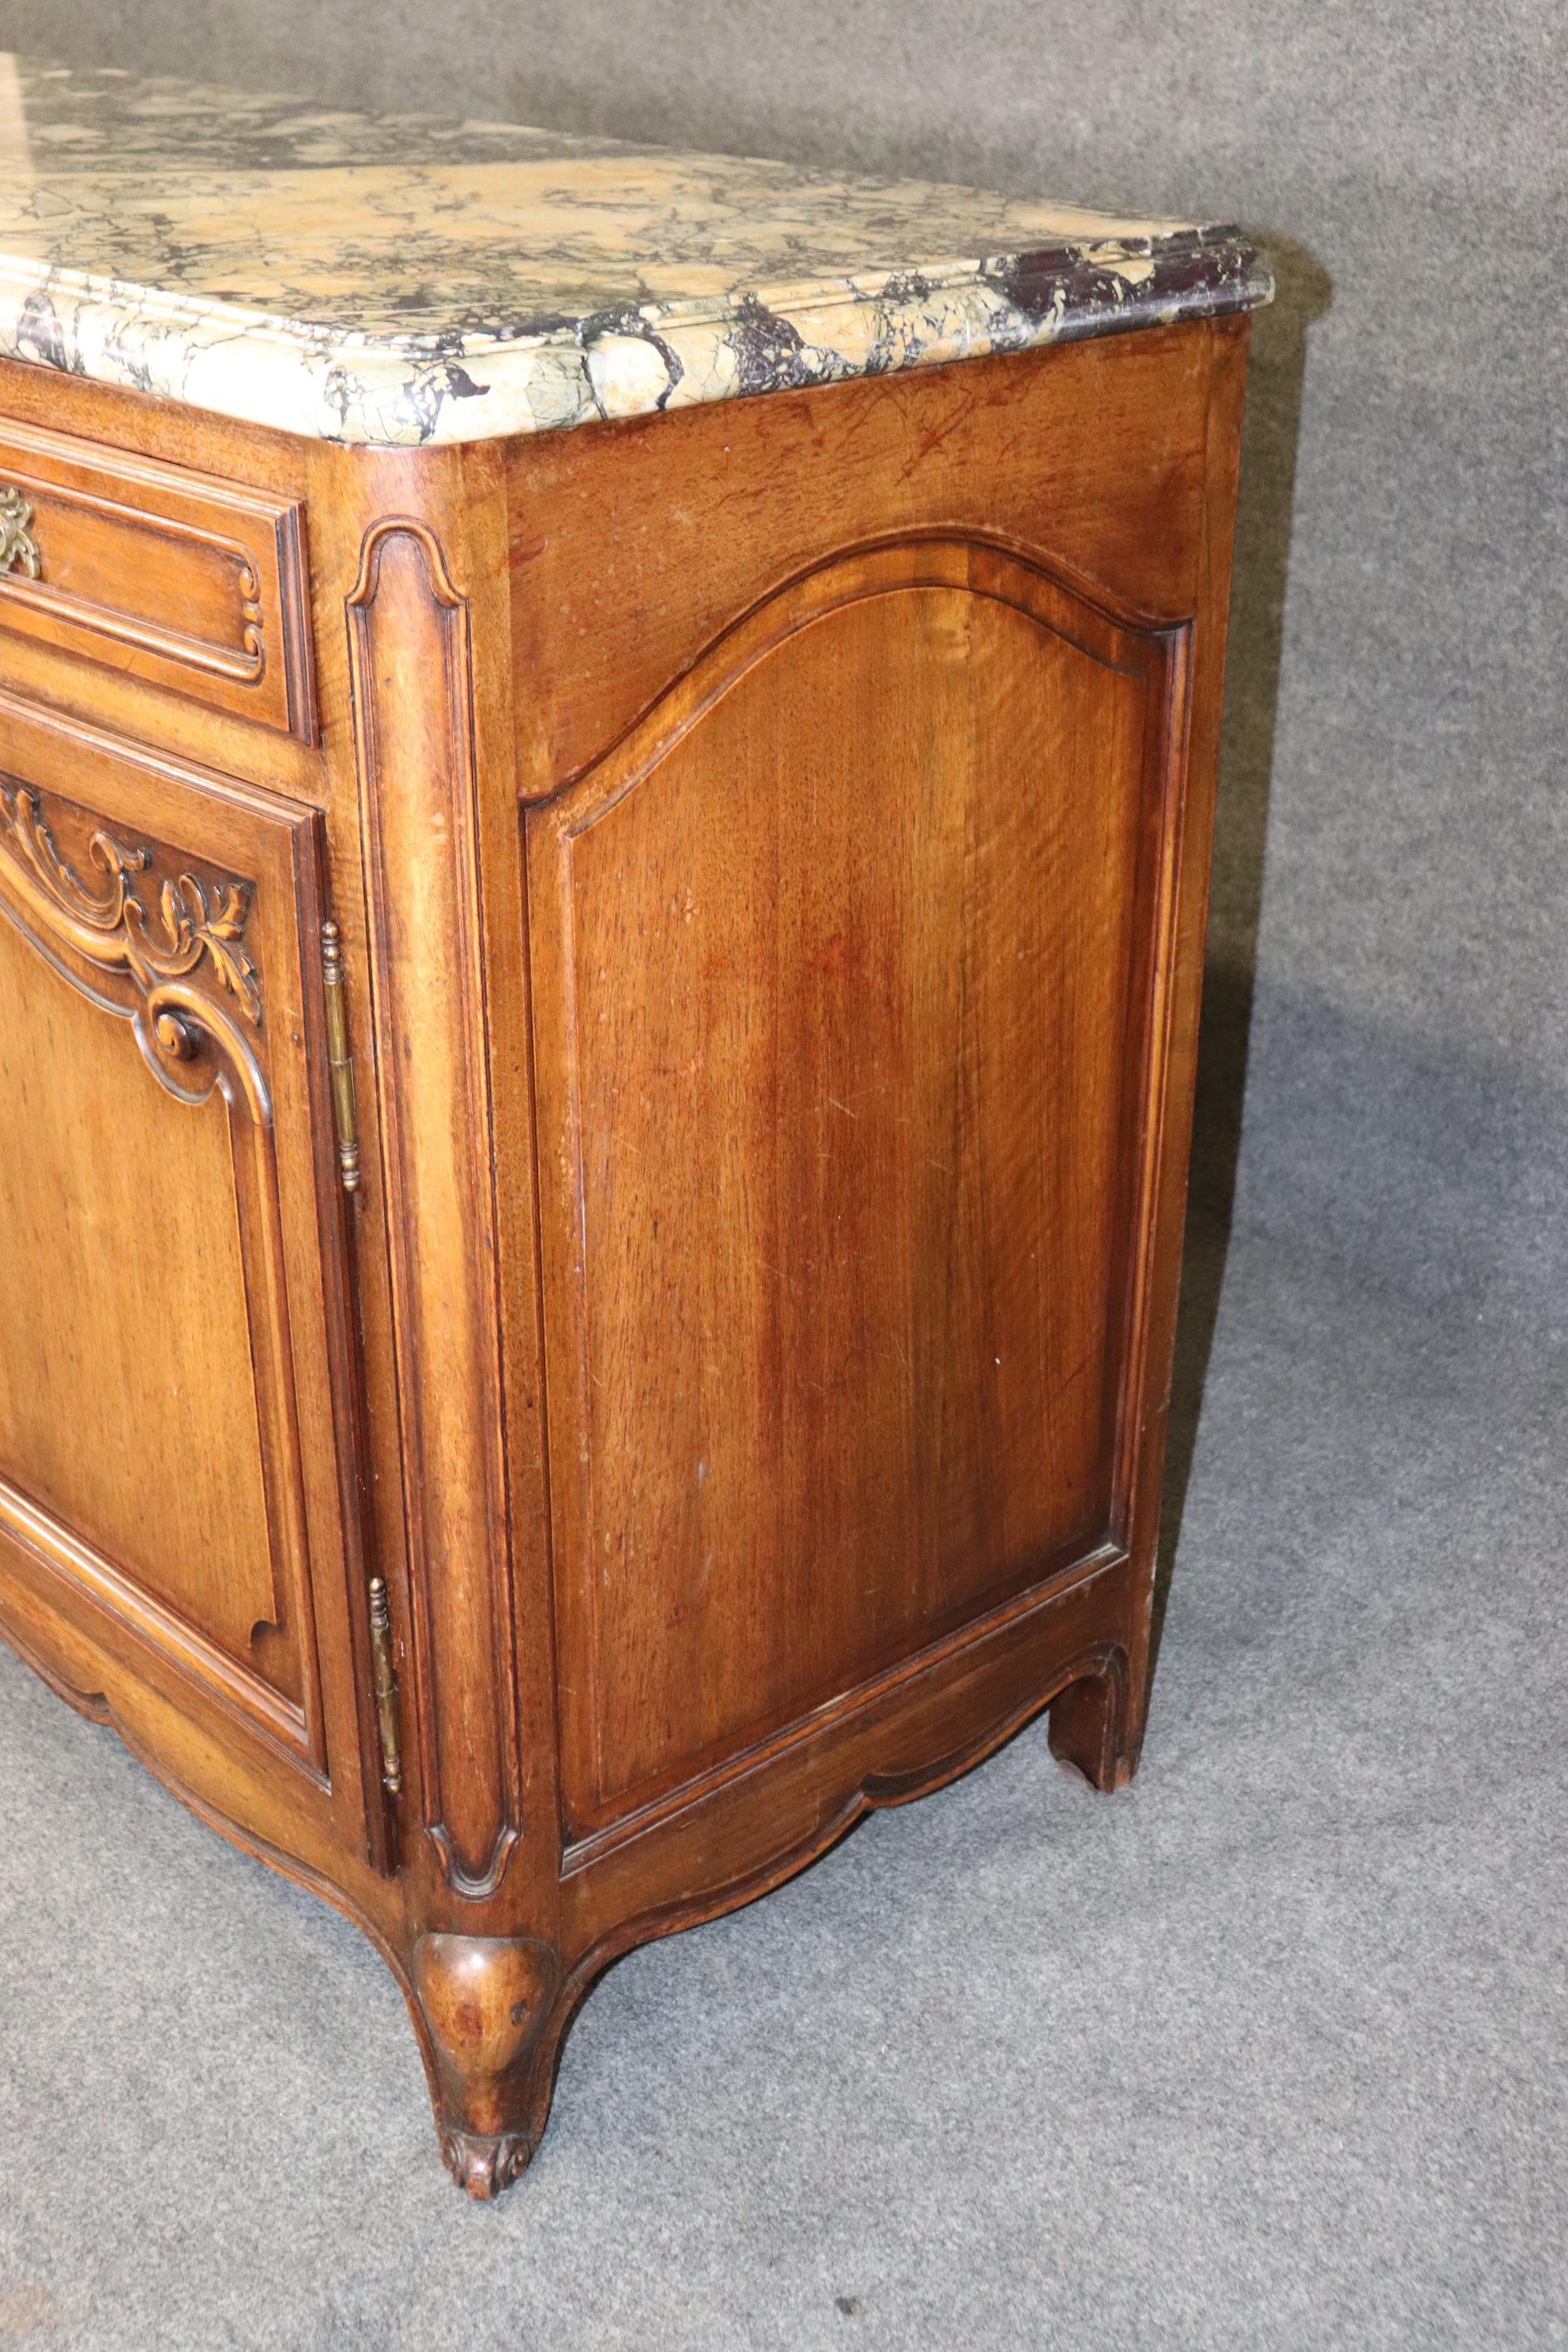 Dimensions- H: 40in W: 77 1/4in D: 22 3/4in 

This antique country French marble top sideboard is made of the highest quality and is bound to bring a sense of class and luxury into your home or place of choosing! If you look at the photos provided,